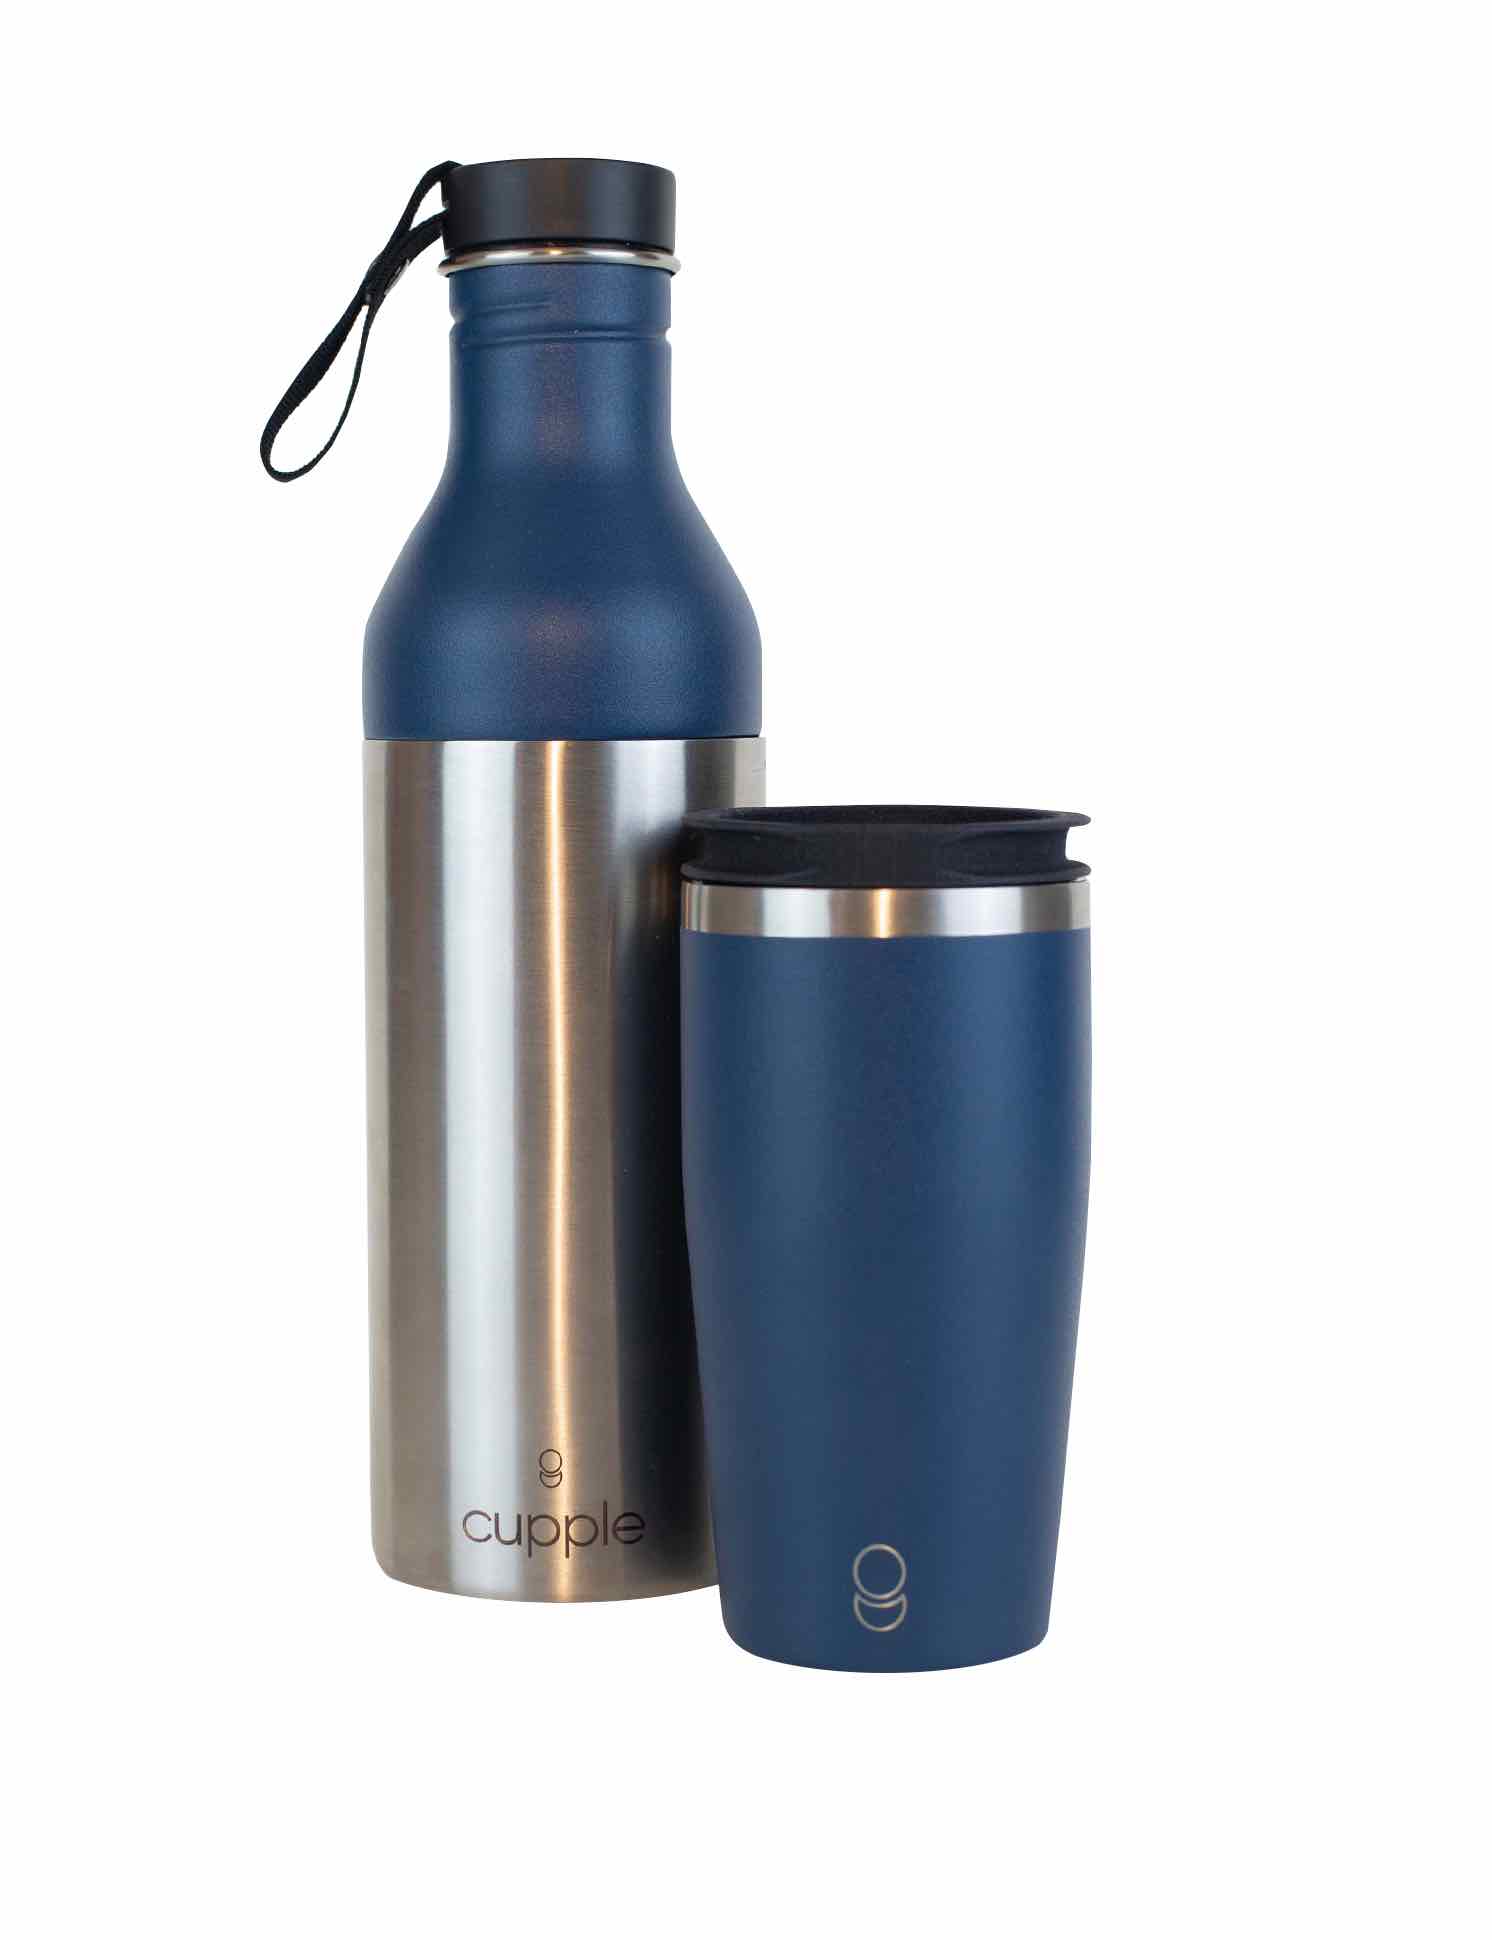 CUPPLE 340ml Cup and Bottle 